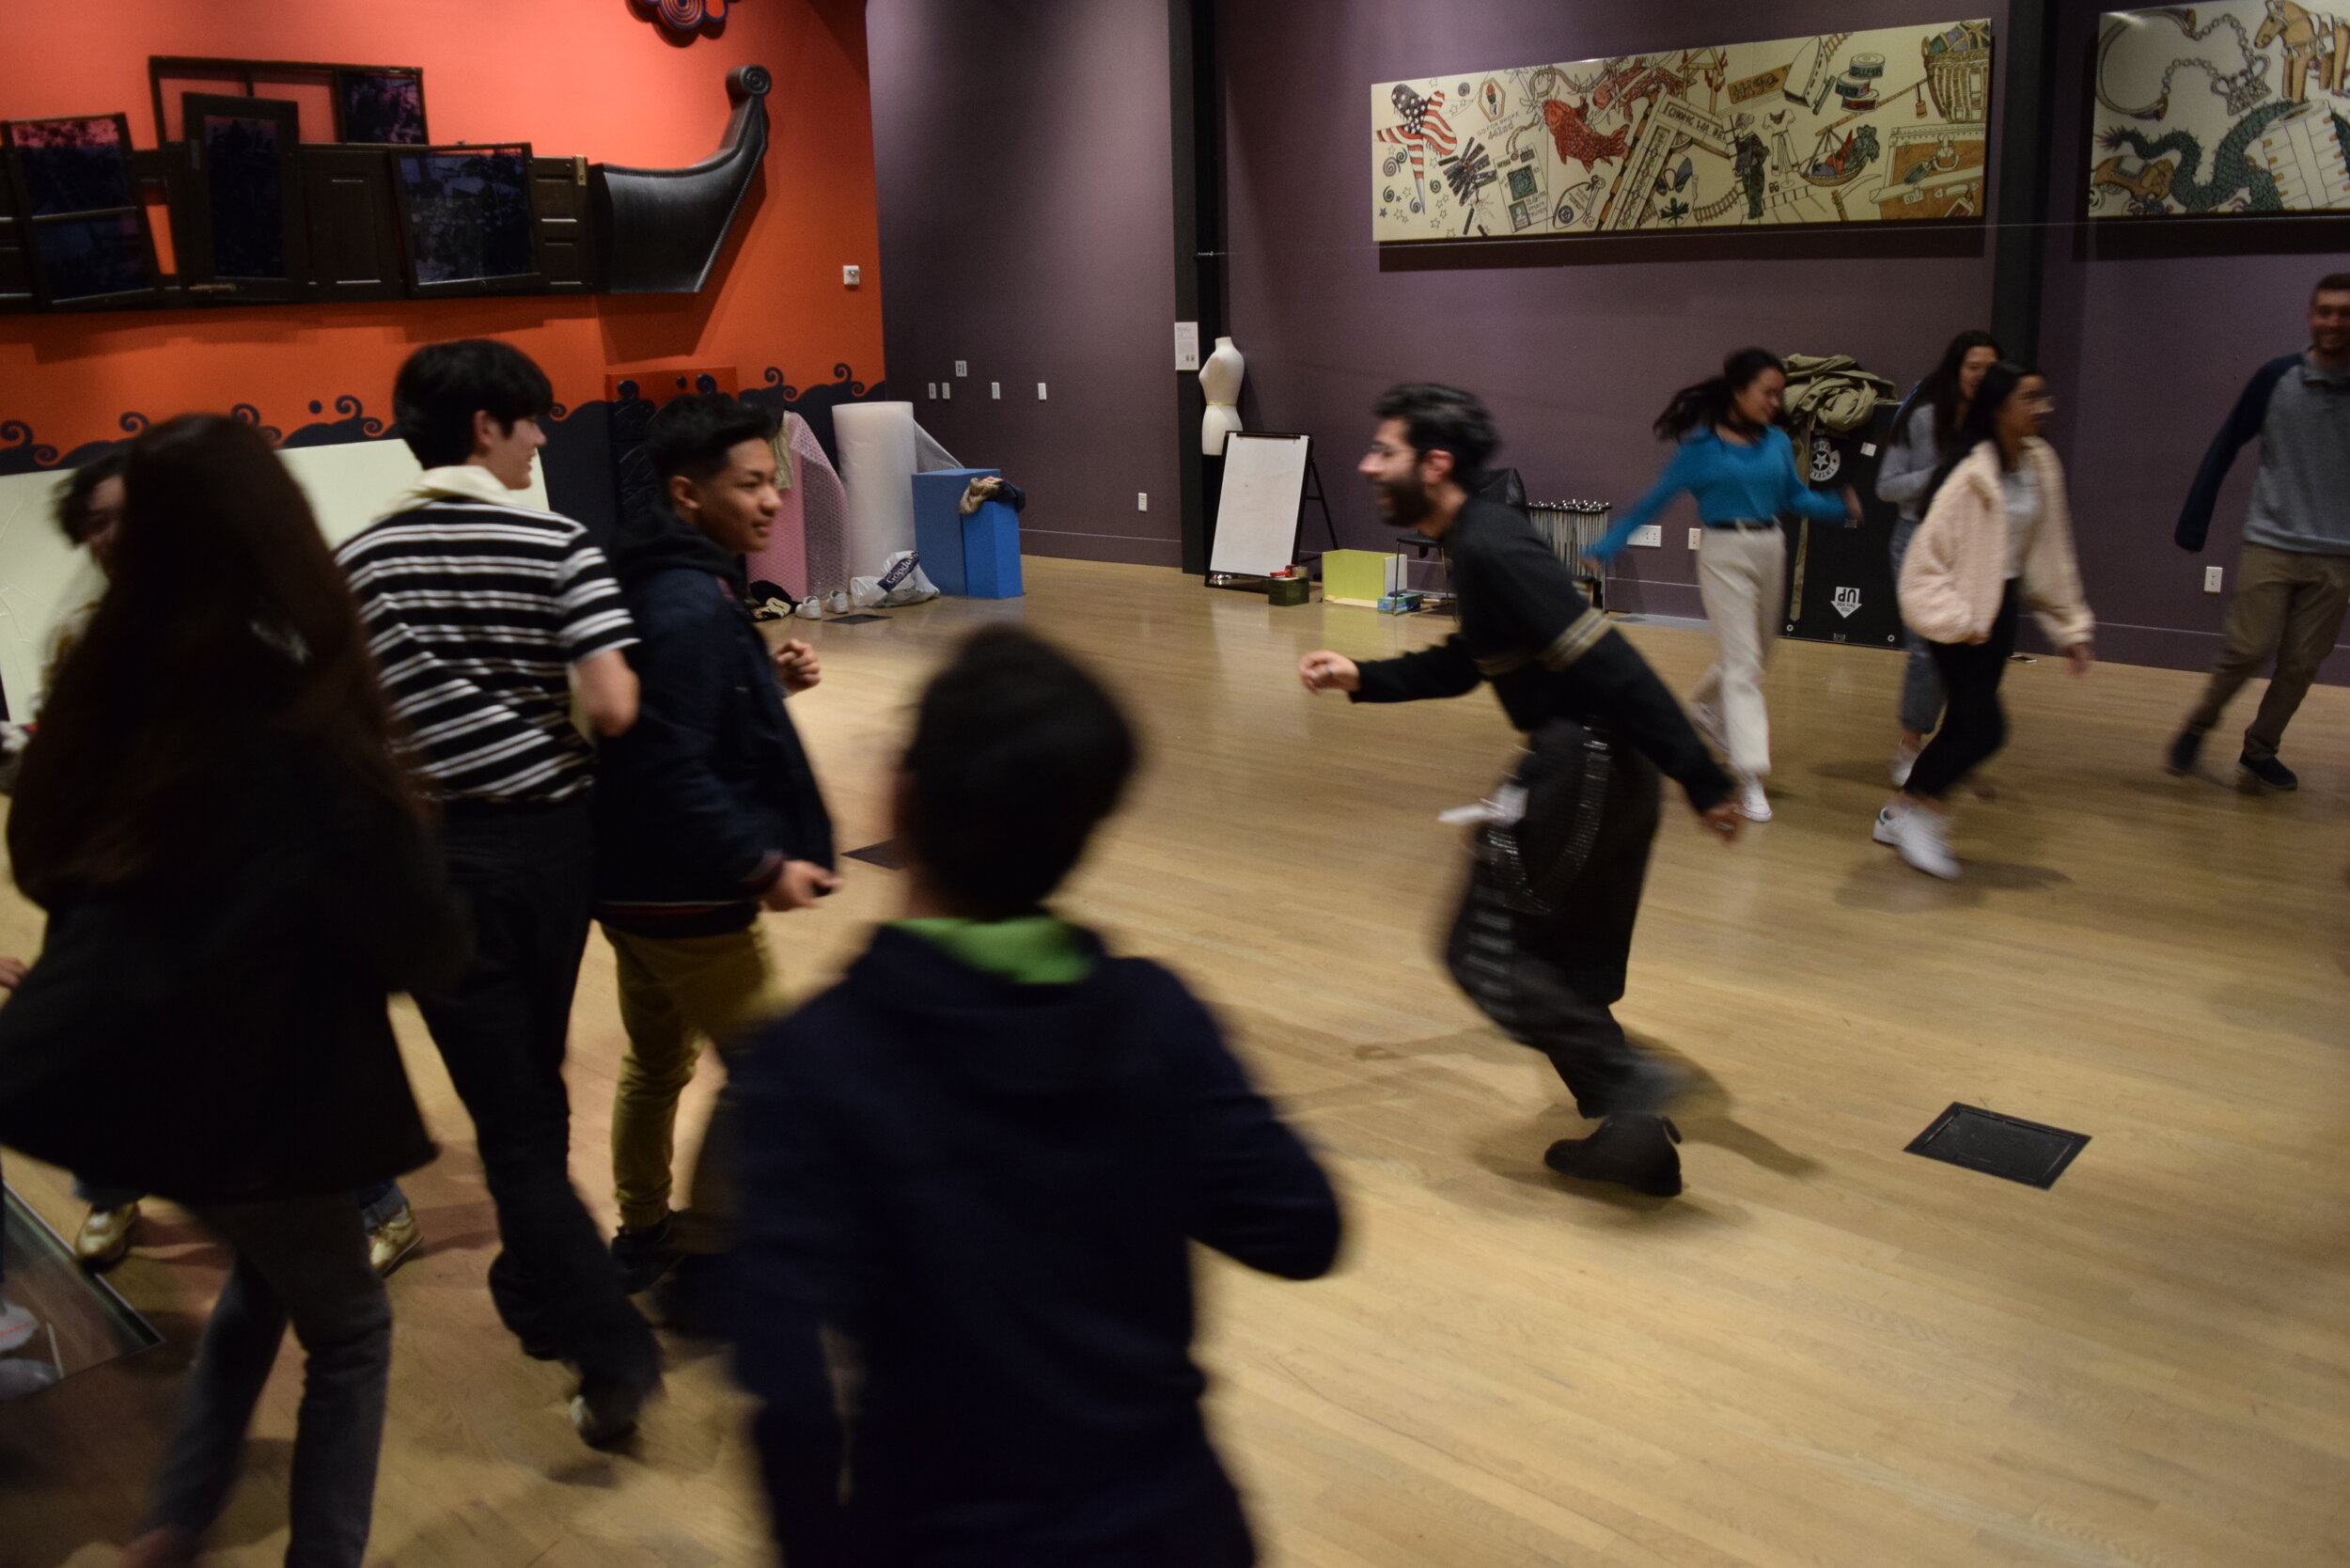  Students participate in a movement exercise, paired up and maintaining eye contact with one another while constantly in motion throughout the Community Hall.  